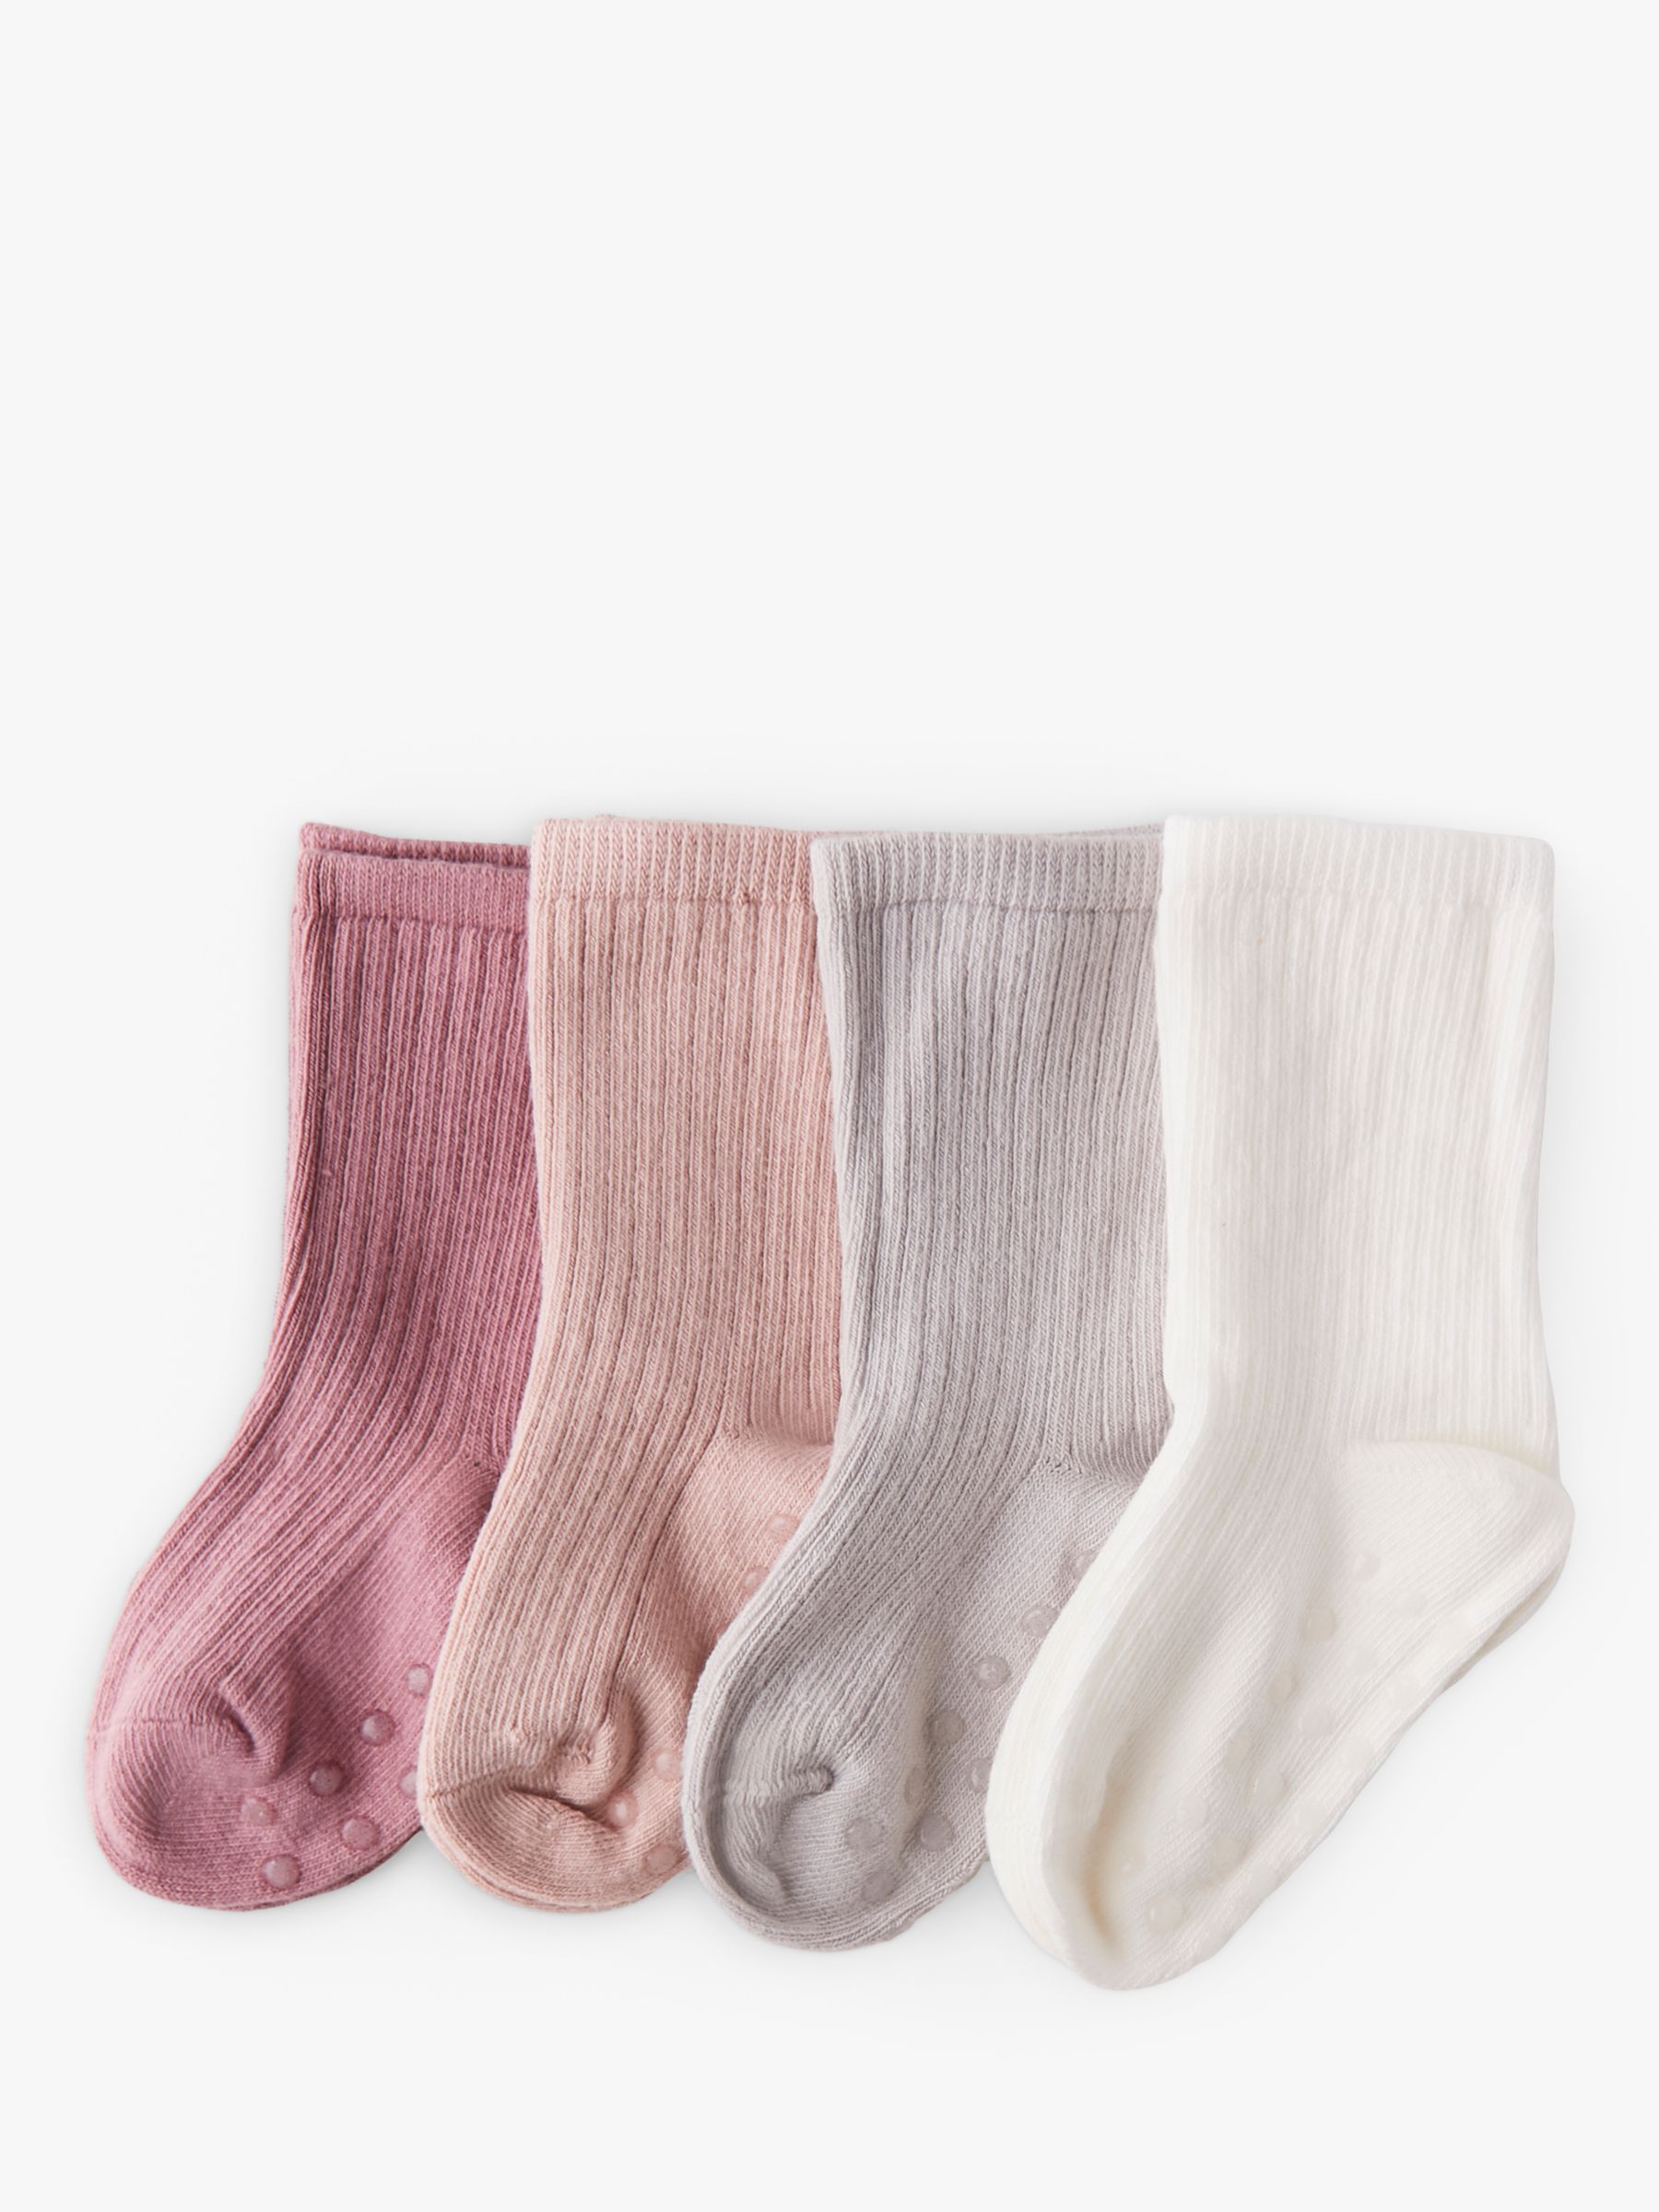 Lindex Baby Organic Cotton Blend Ribbed Socks, Pack Of 4, Dusty Lilac, 1-4 months